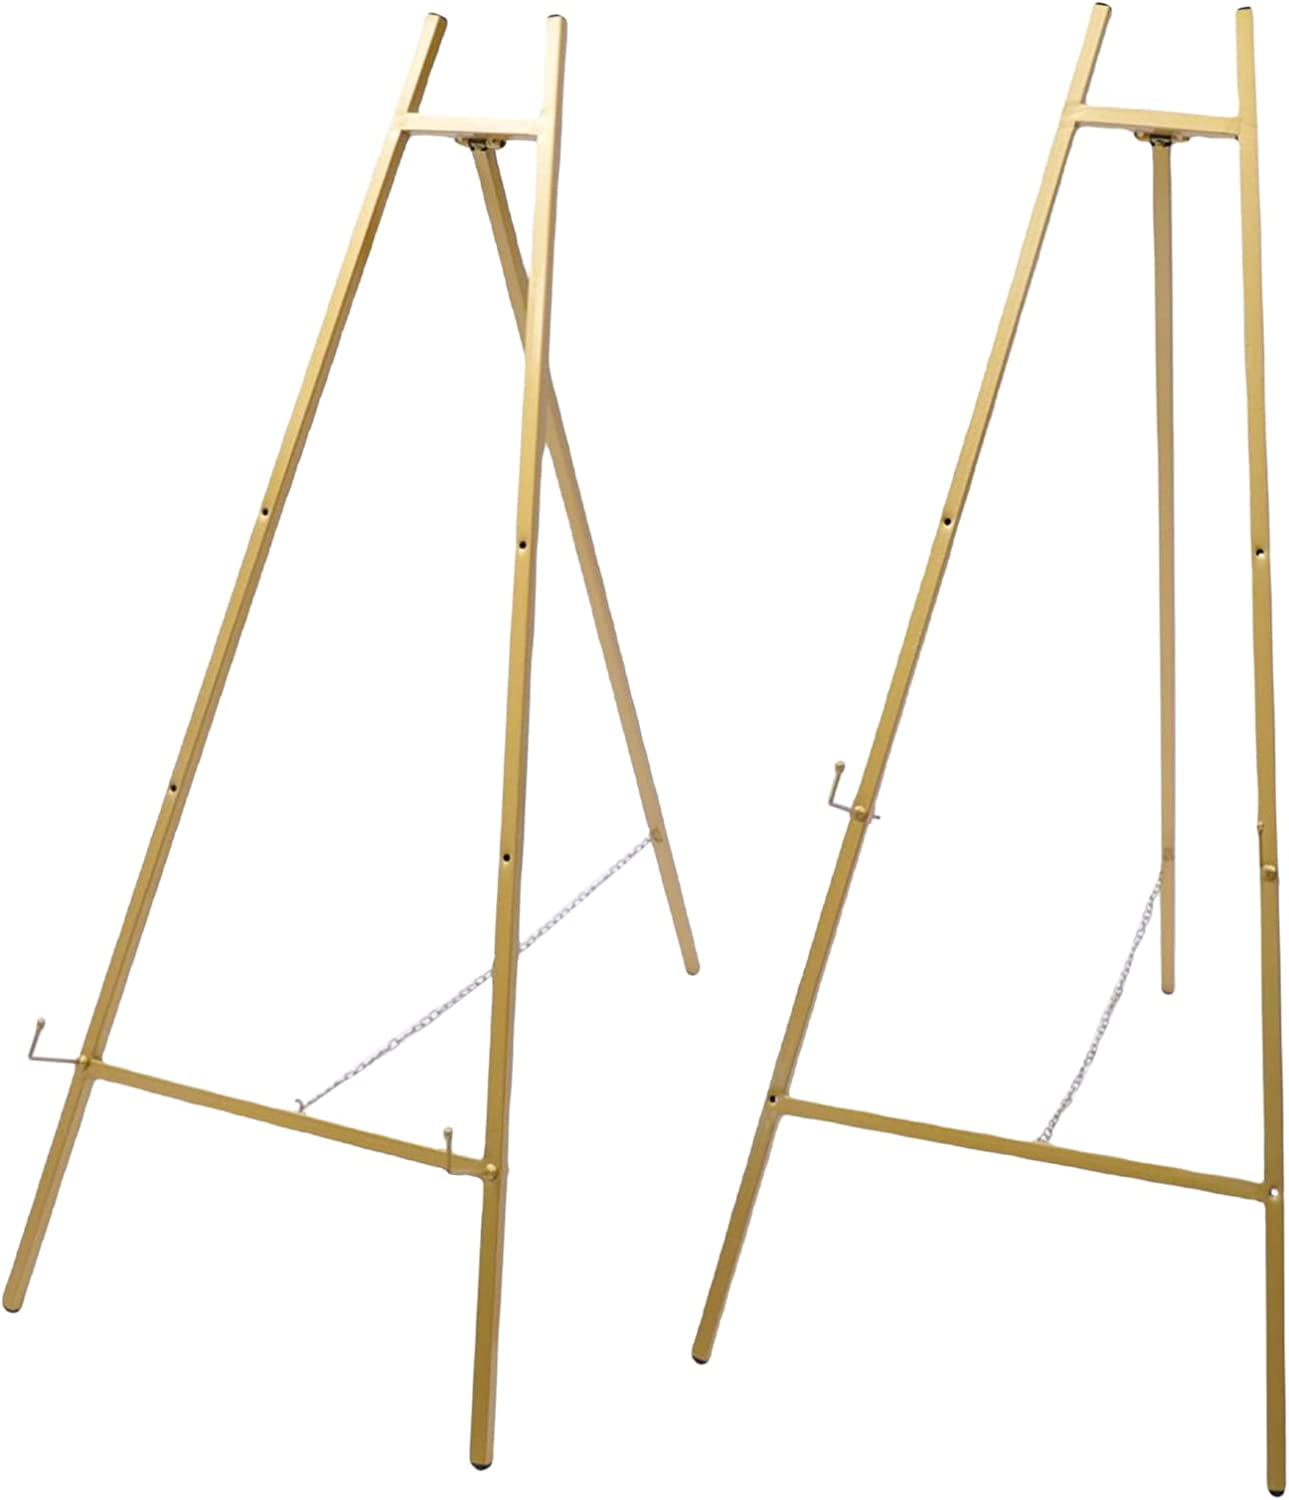 4 Pack Iron Easel Display Stand, 5 Inch Decorative Easel for Tabletop,  Plates, Pictures, Paintings, Wedding and Party Decor 